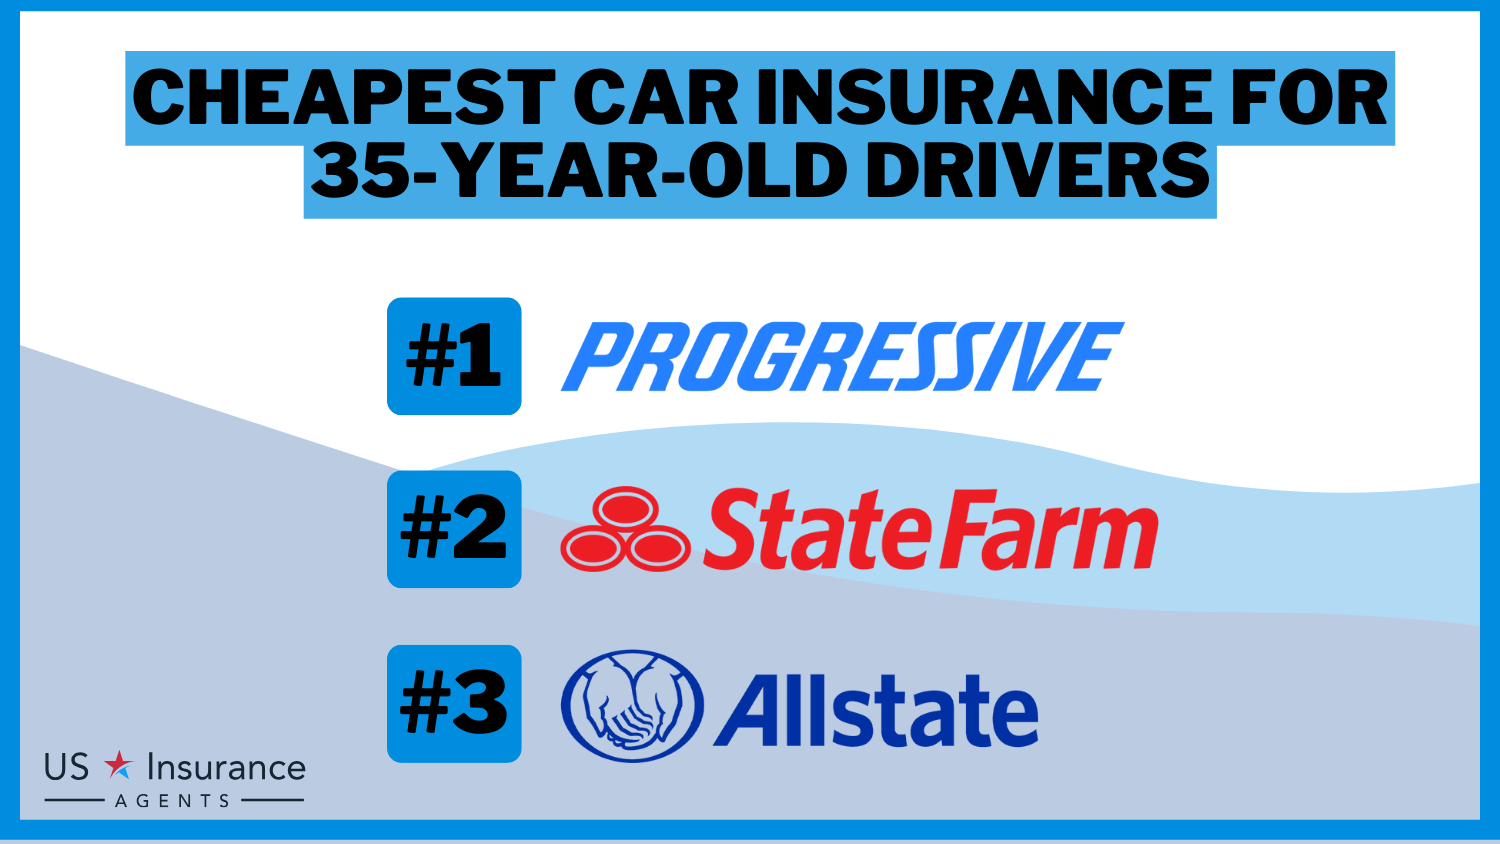 Cheapest Car Insurance for 35-Year-Old Drivers: Progressive, State Farm, and Allstate